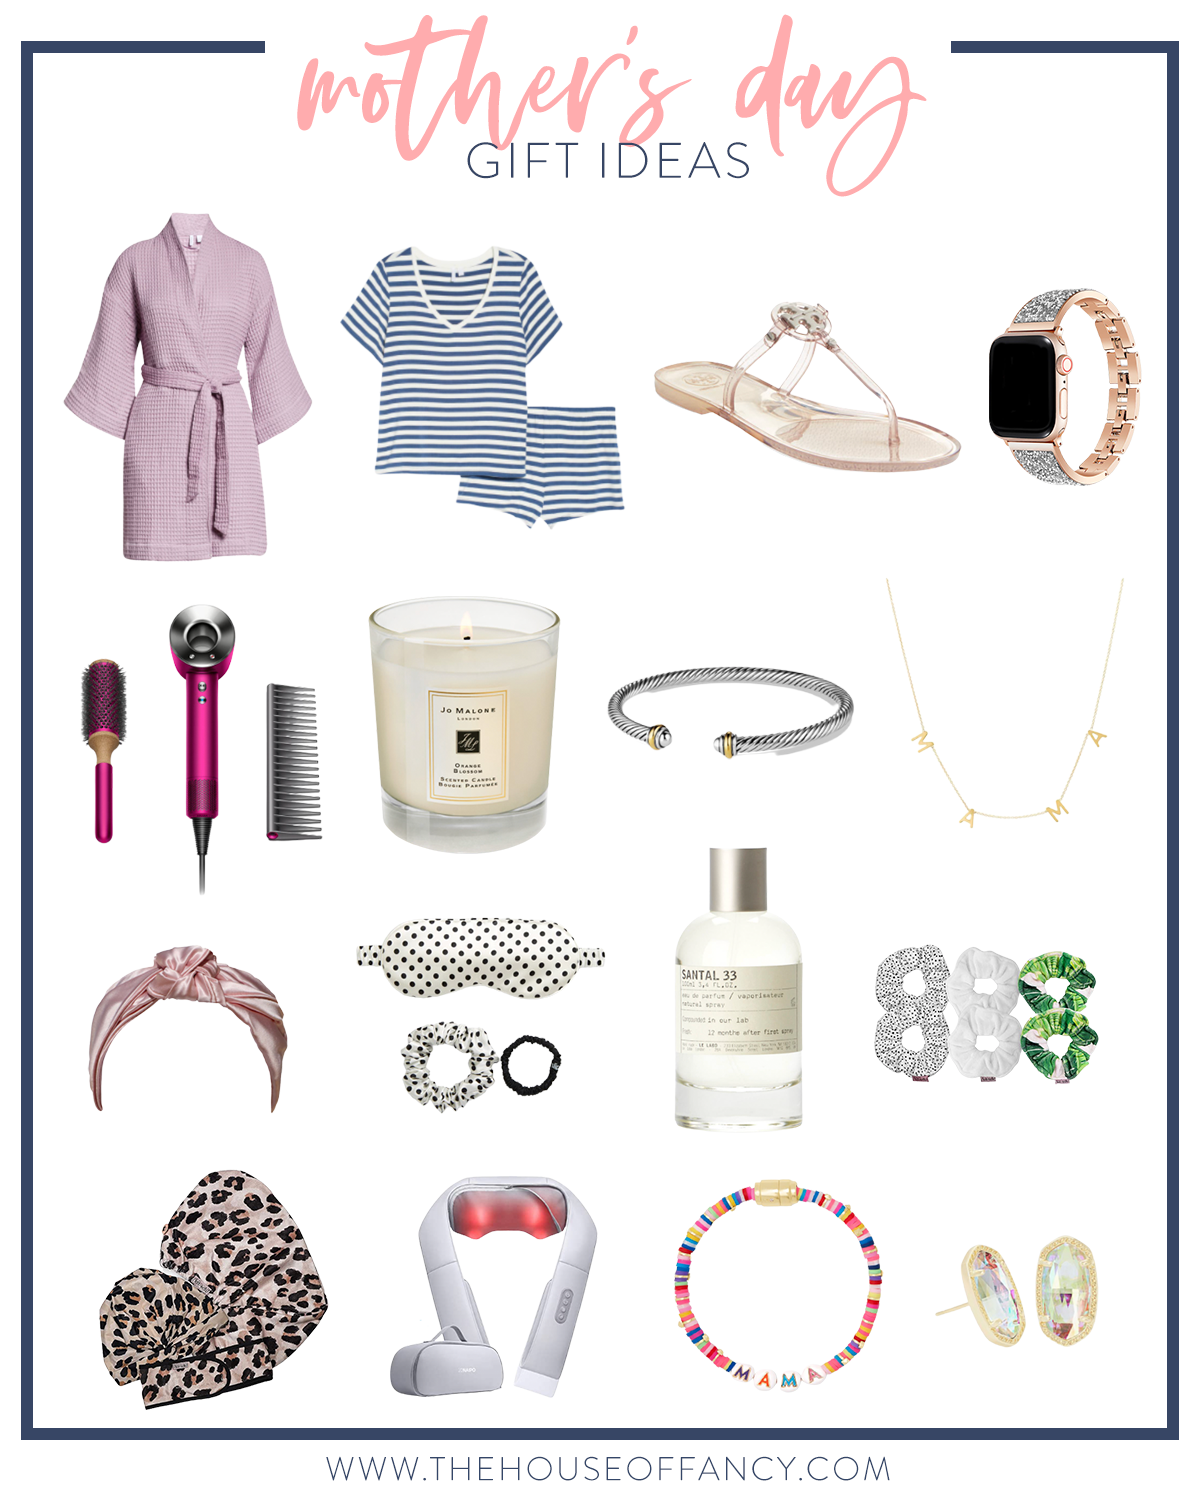 Mother's Day Gift Ideas by popular Houston life and style blog, The House of Fancy: collage image a rob, blue and white stripe pajama set, Tory Burch sandals, apple watch, knot headband, neck massager, sleepi mask, bracelet, candle, dyson hair dryer, post earrings, and mama necklace. 